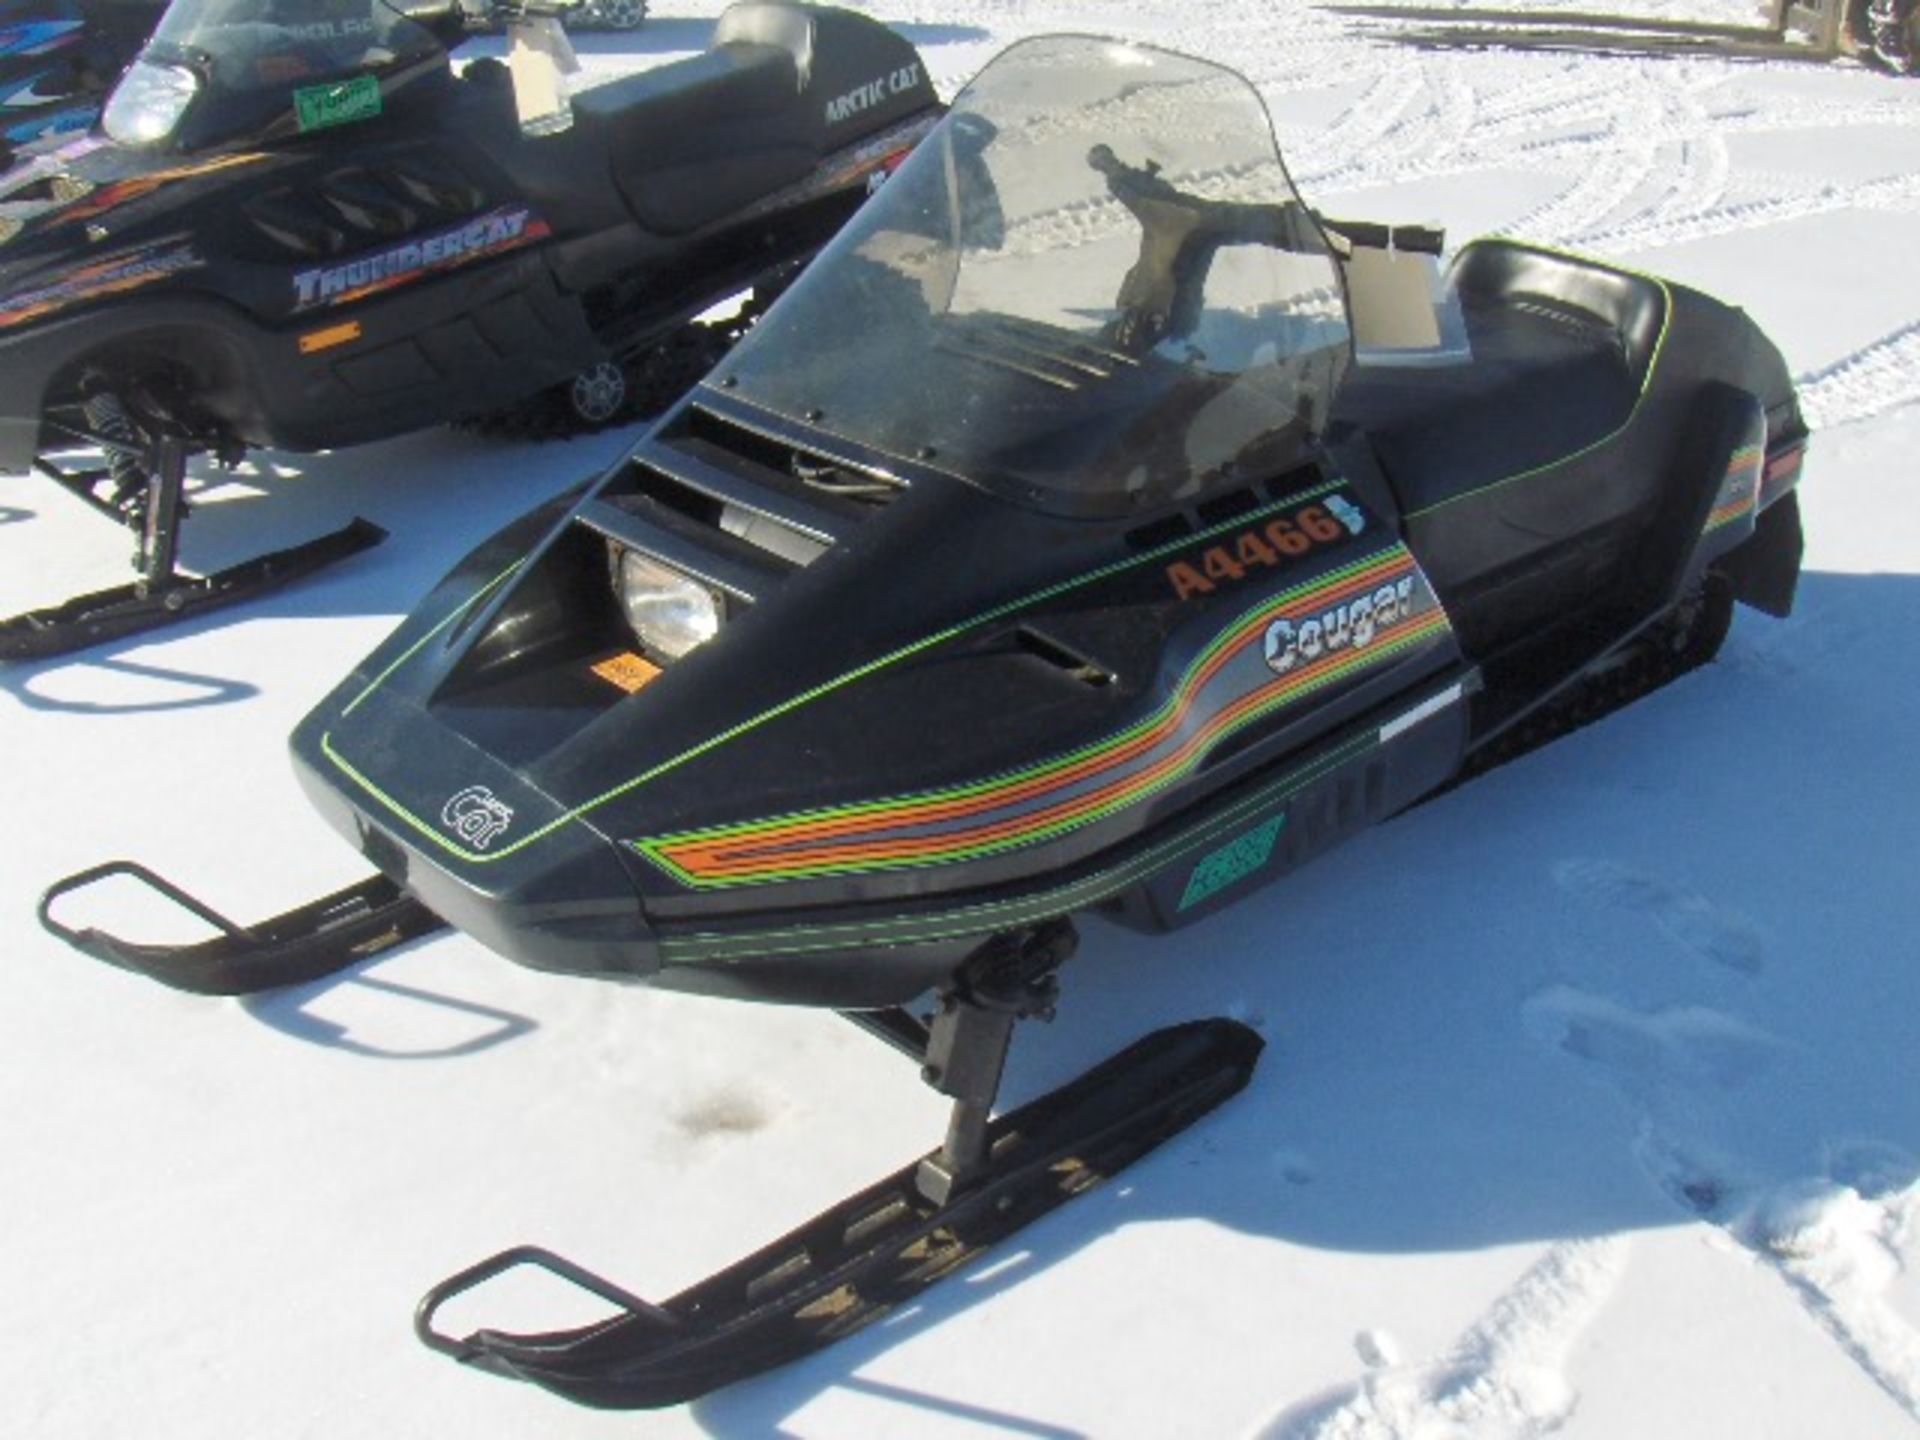 1987 ARCTIC CAT 500 COUGAR  8701275 snowmobile, studded with carbides, sold with a bill of sale